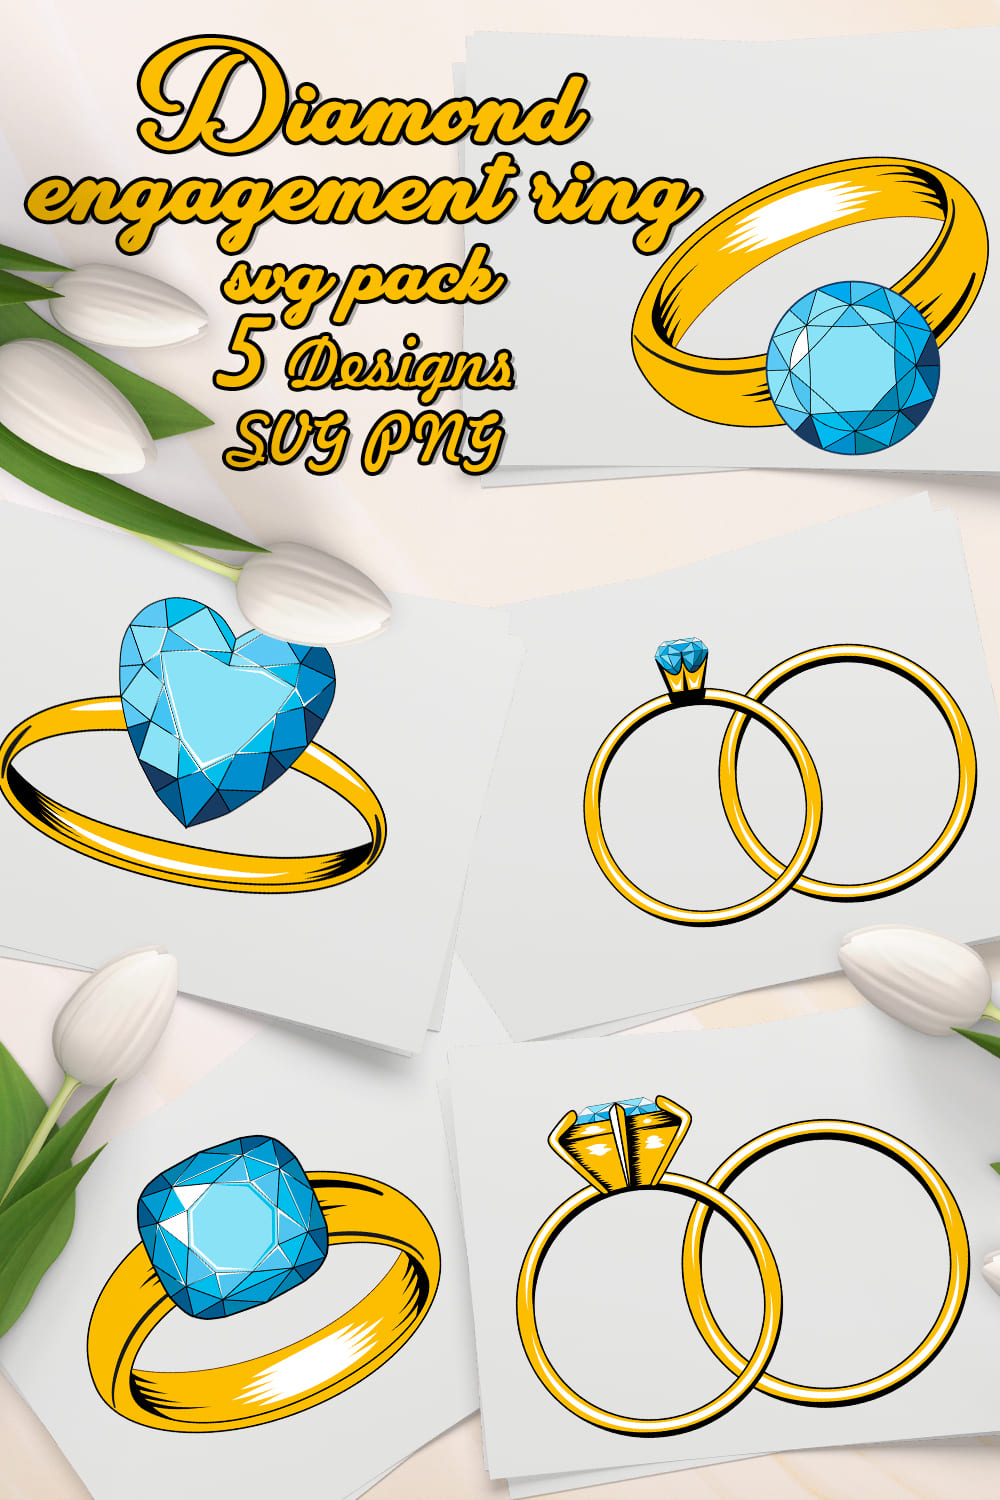 Diamond Engagement Ring SVG - pinterest image preview.